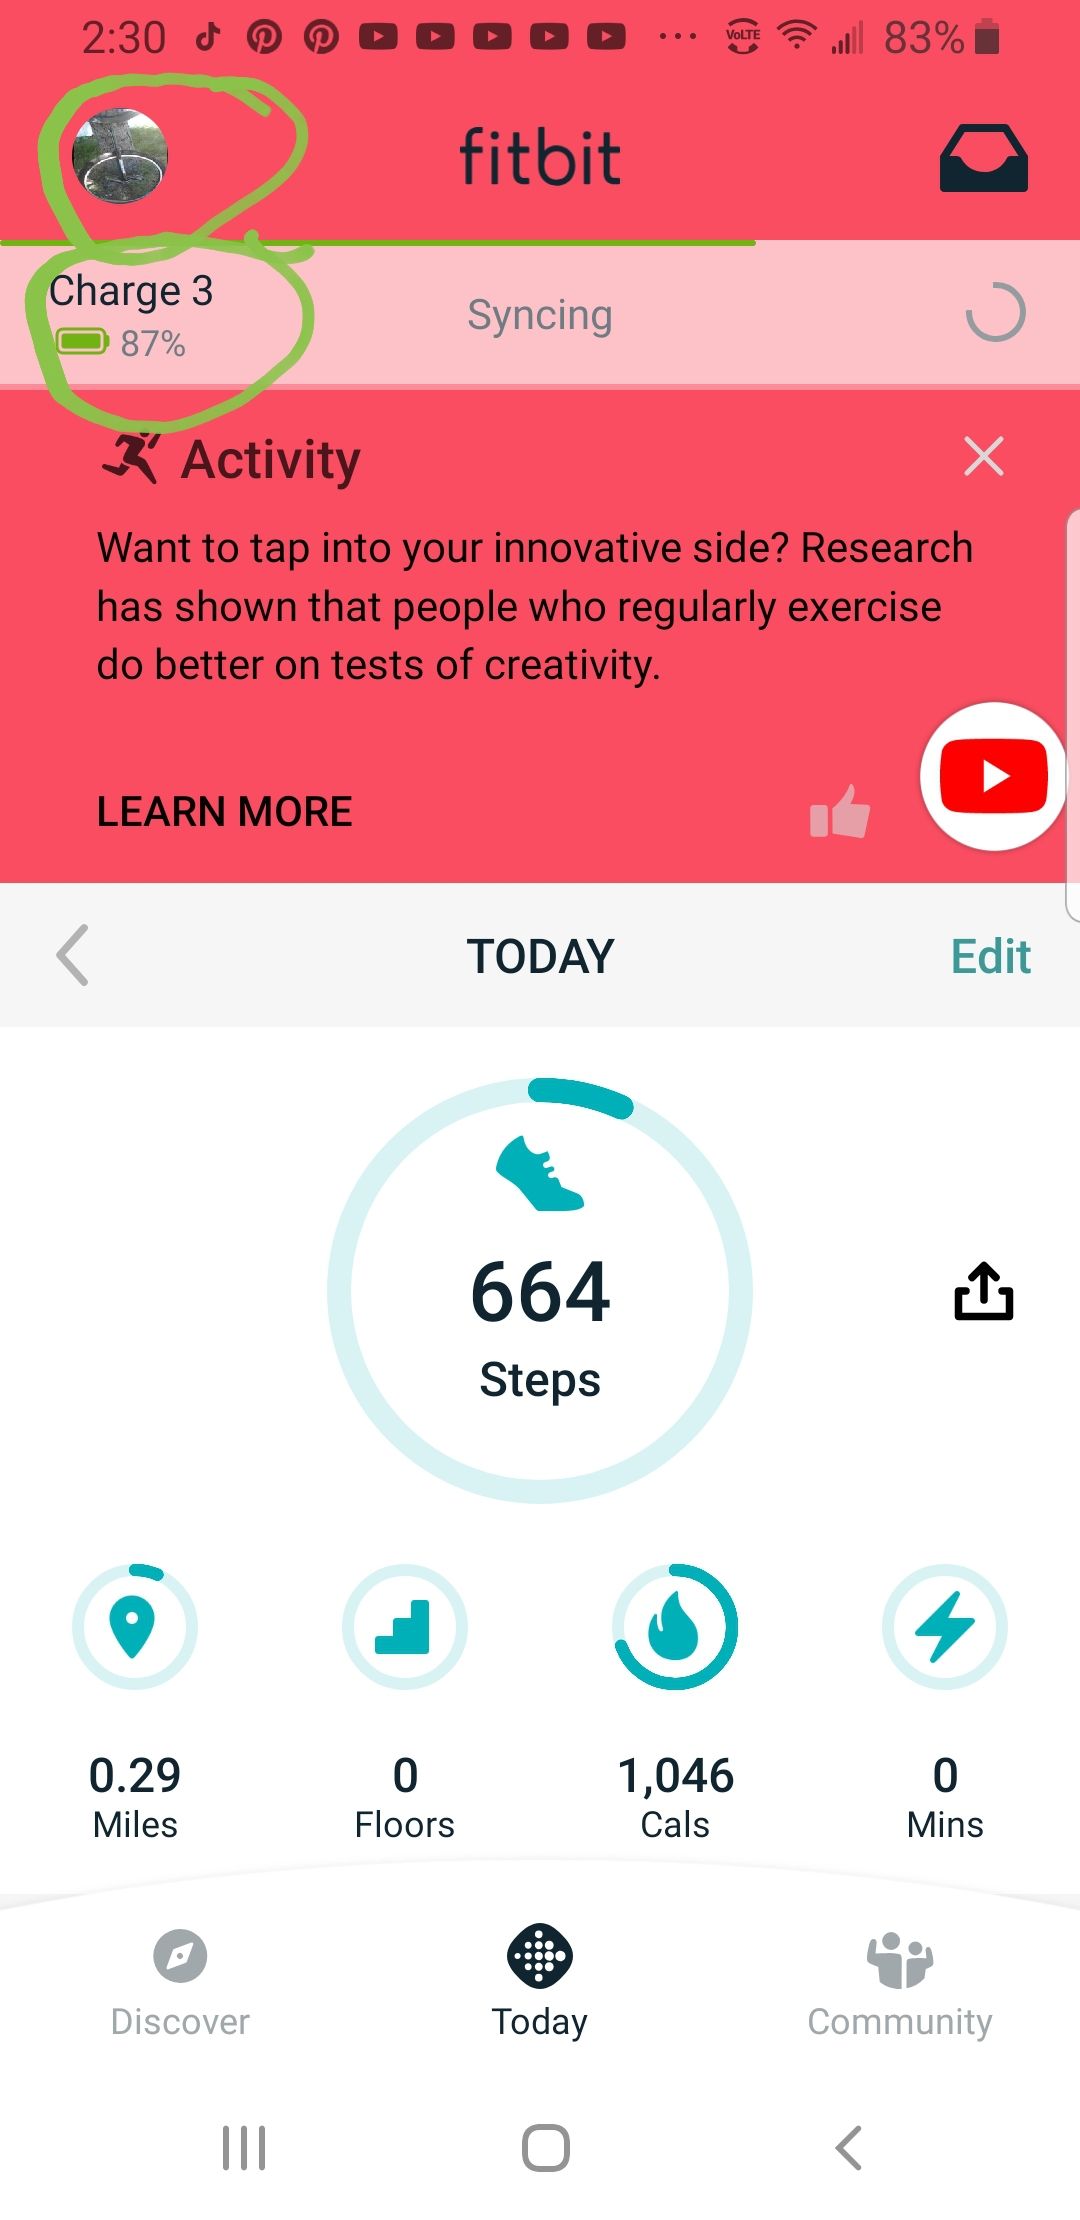 fitbit charge 3 alarm not working